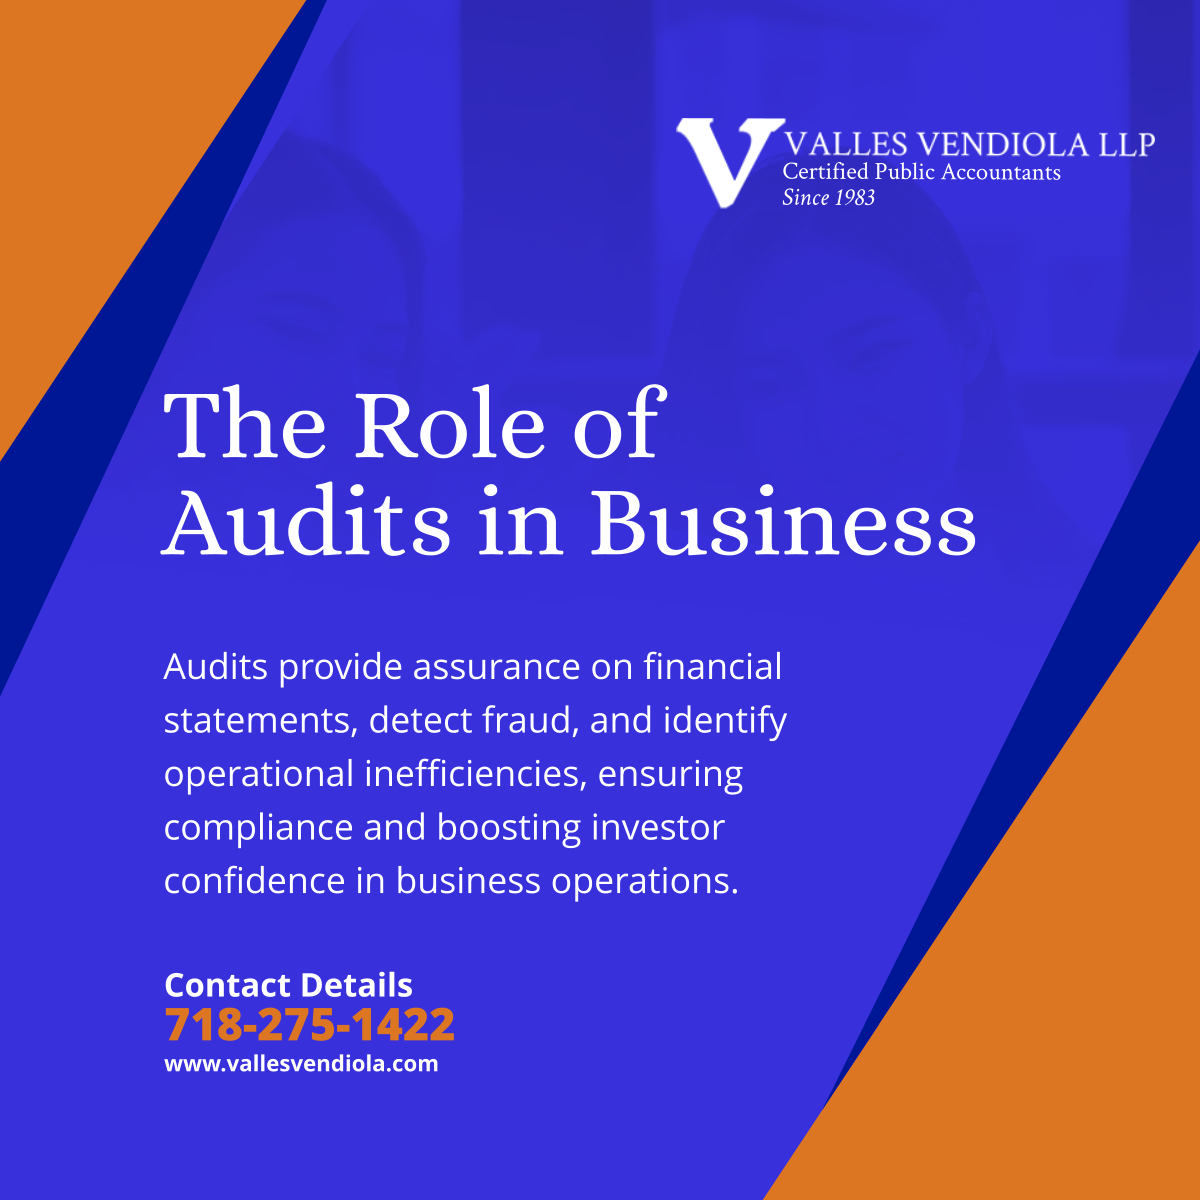 Discover how audits safeguard business integrity and promote transparency. 

Read more: facebook.com/photo/?fbid=12…
  
#AuditInsights #FinancialIntegrity #AccountingFirm